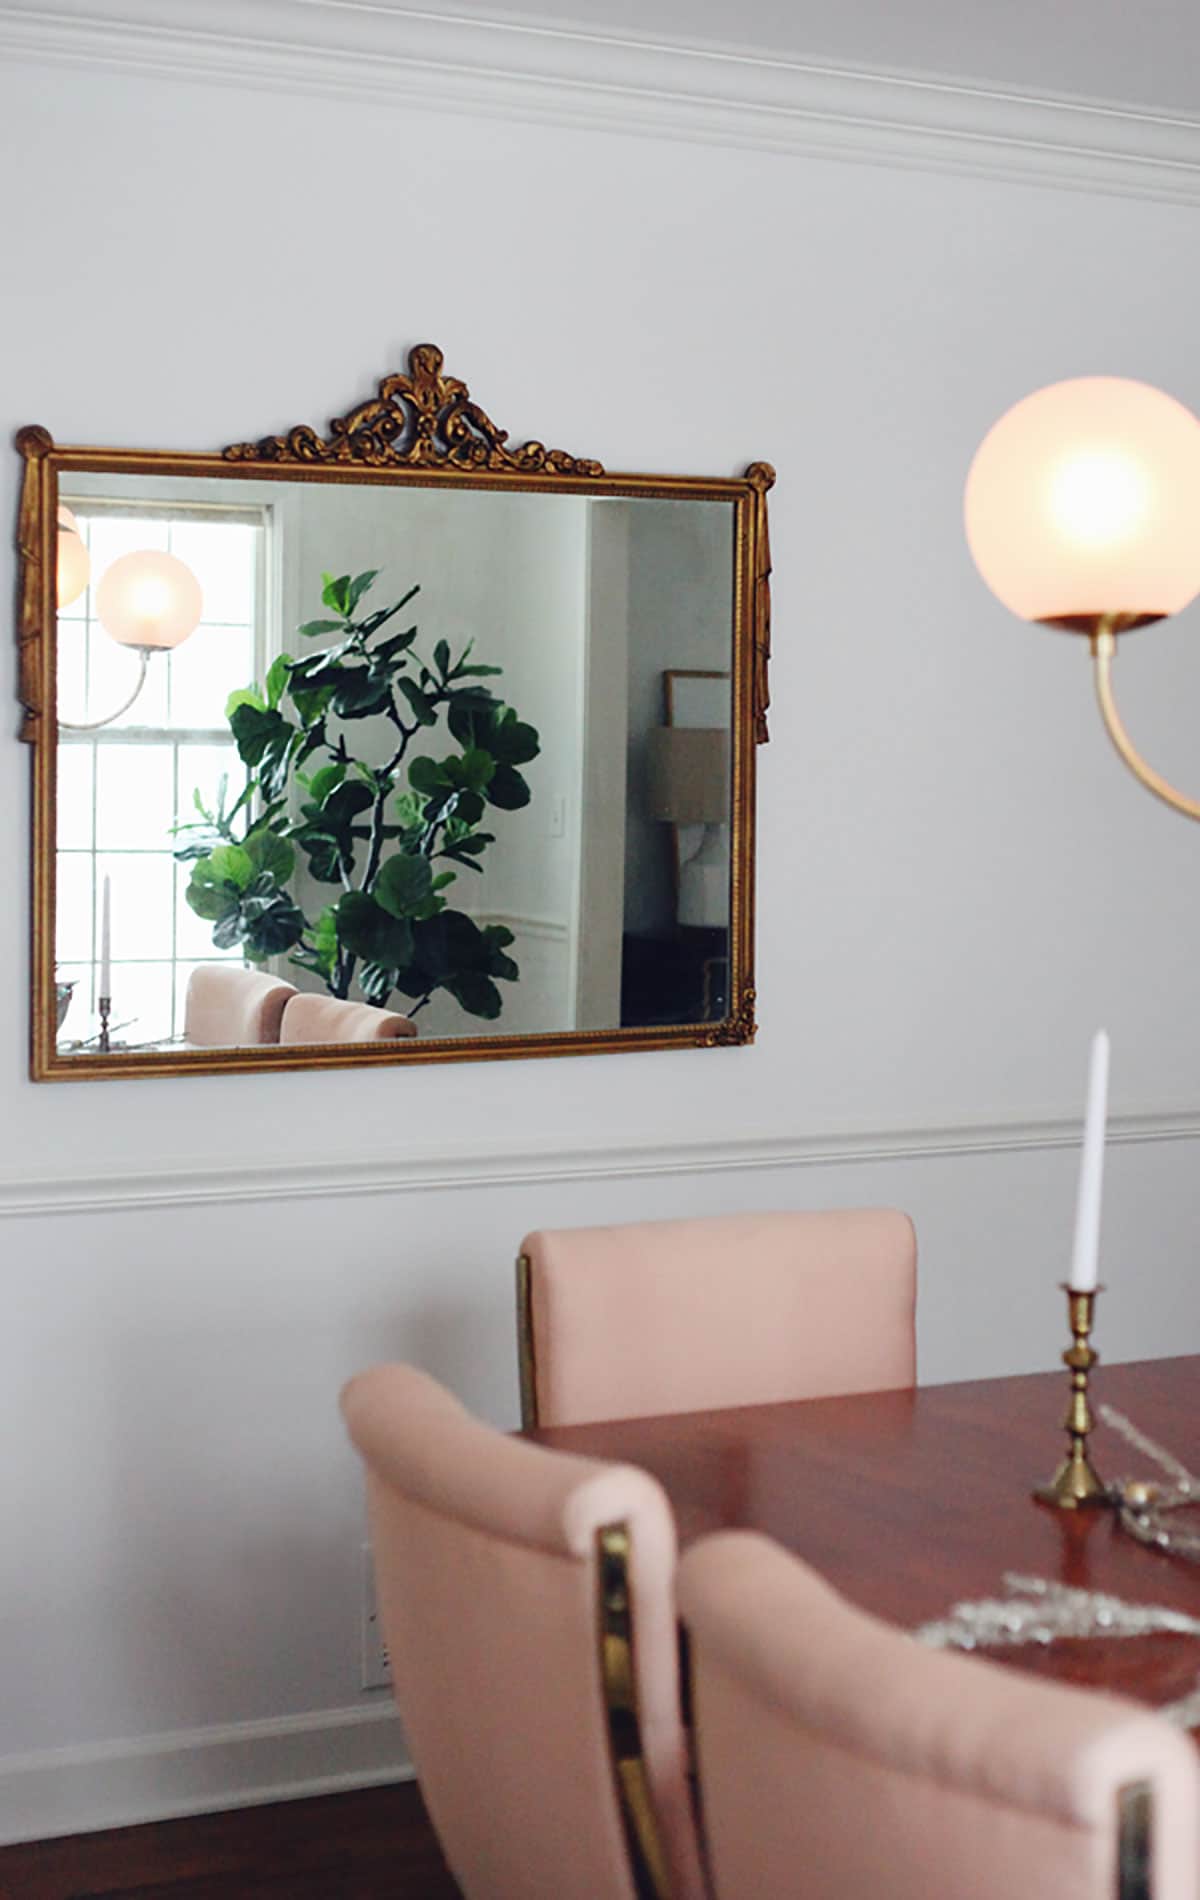 How To Make Your Home Look Expensive - Add extra natural light by hanging a mirror on the wall. This one hangs opposite the window to reflect sunlight. 